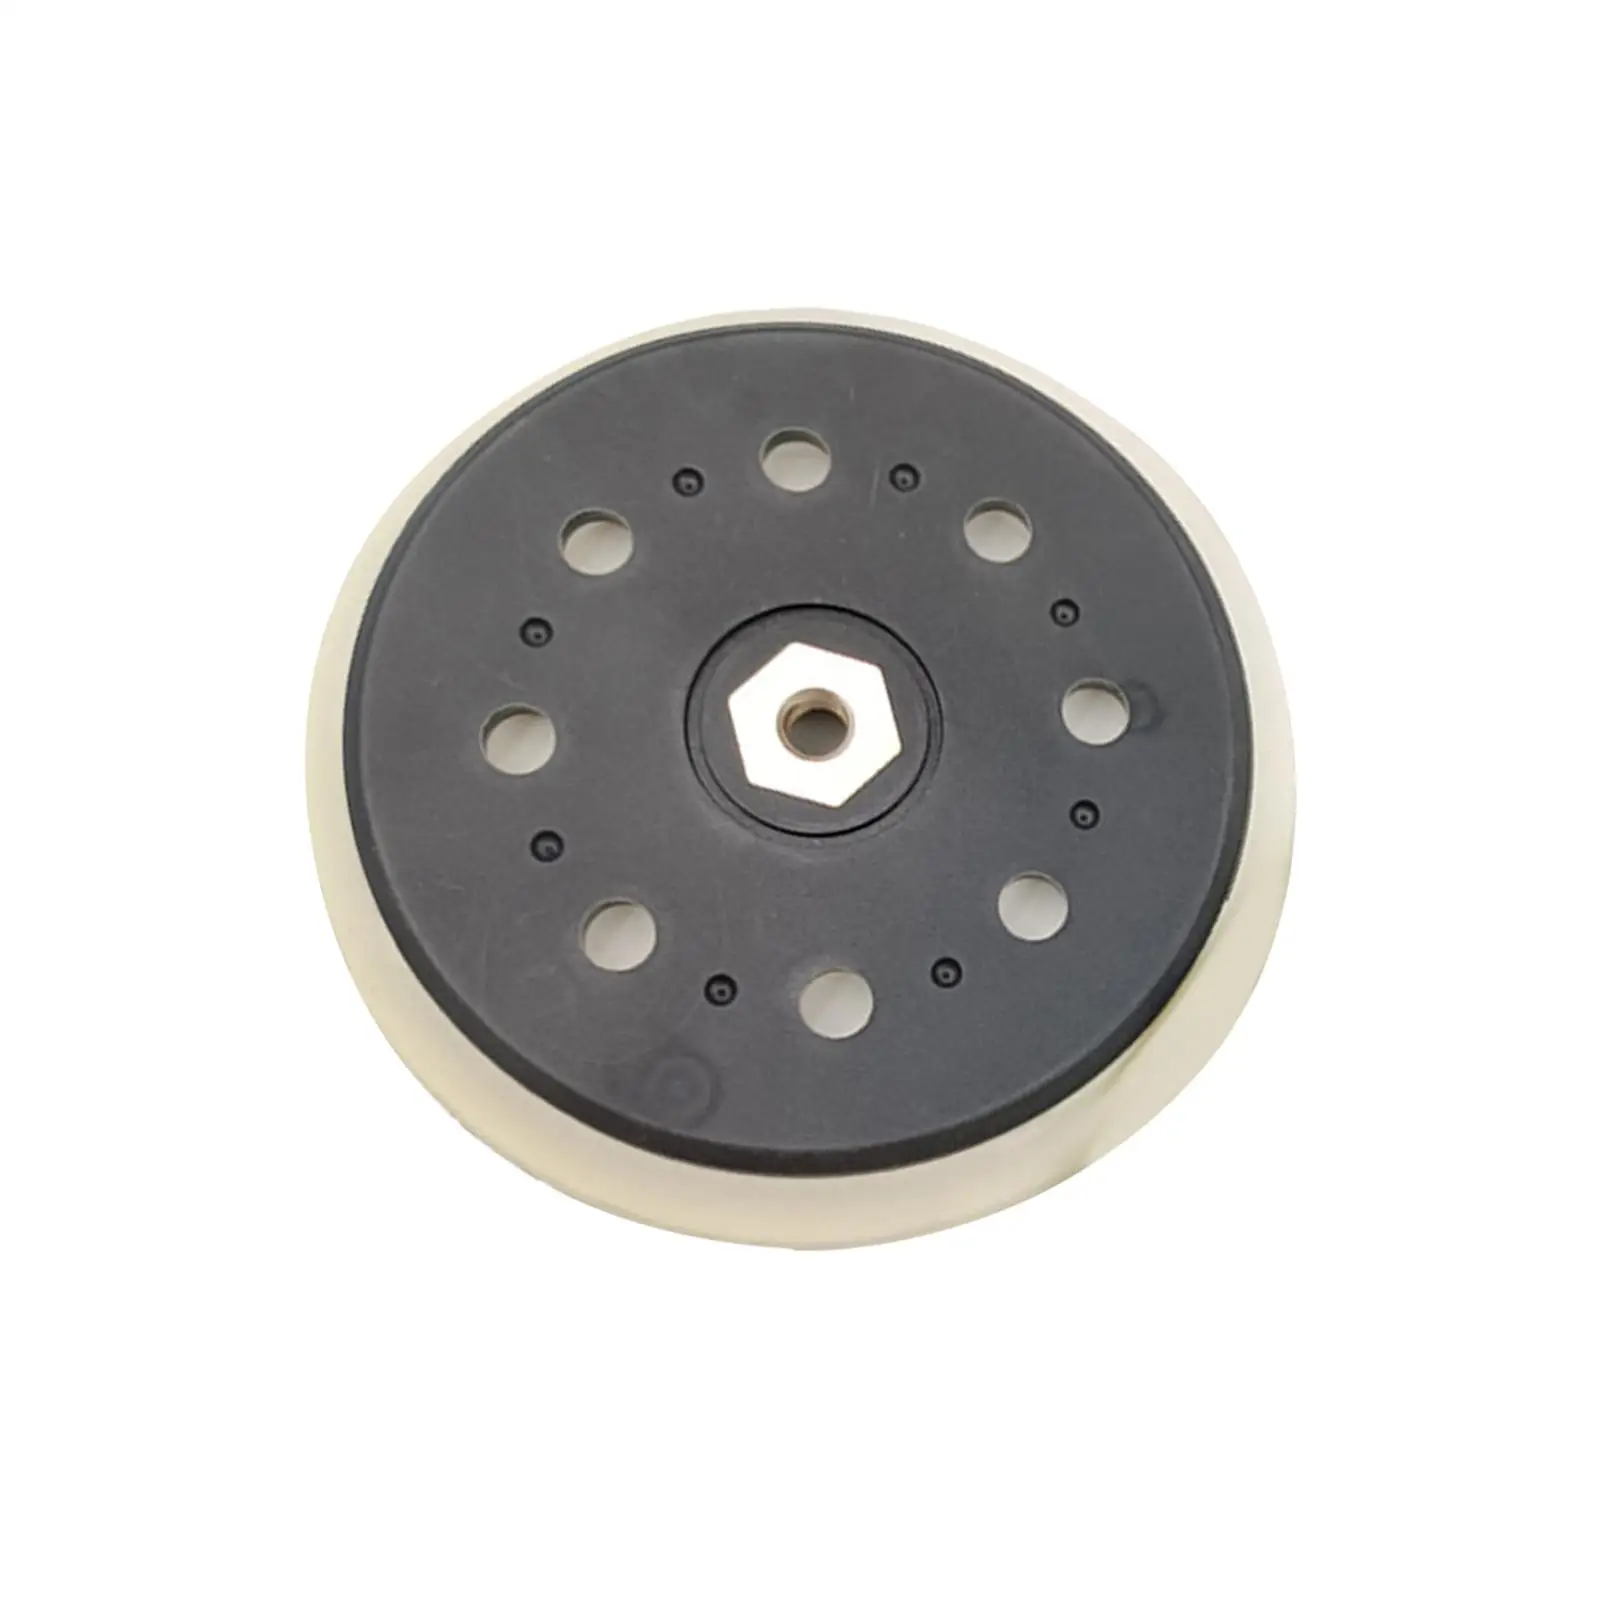 15 Holes Sanding Disc Pad 6 inch Stable Backup Pad Sander Accessories Replace Sanding Backing Ventilation for for BO6050J